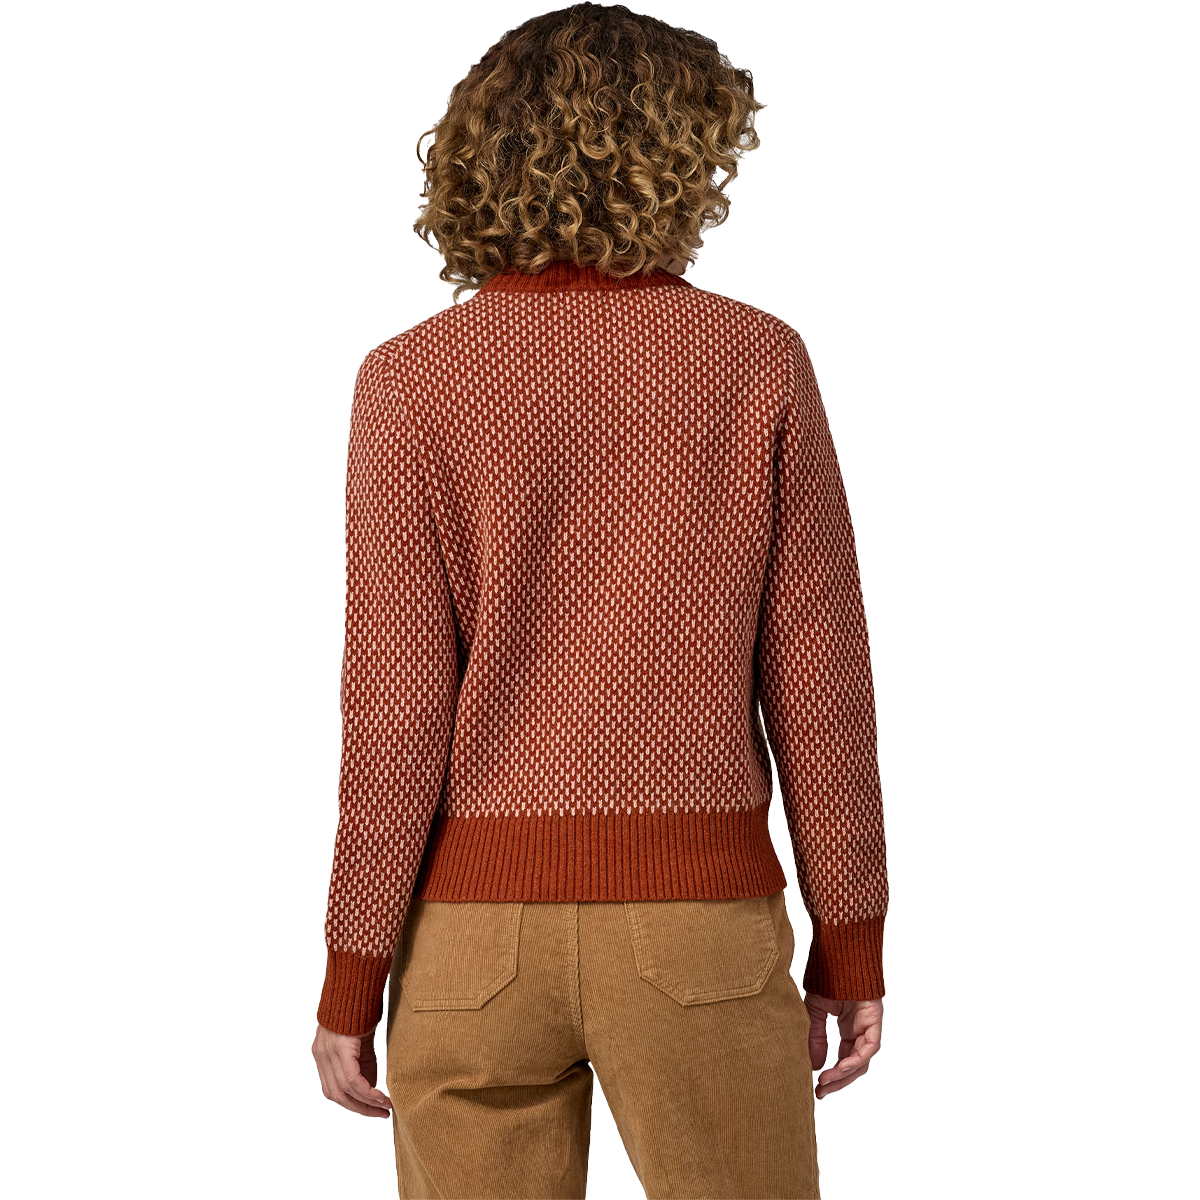 Women's Recycled Wool-Blend Crewneck Sweater alternate view